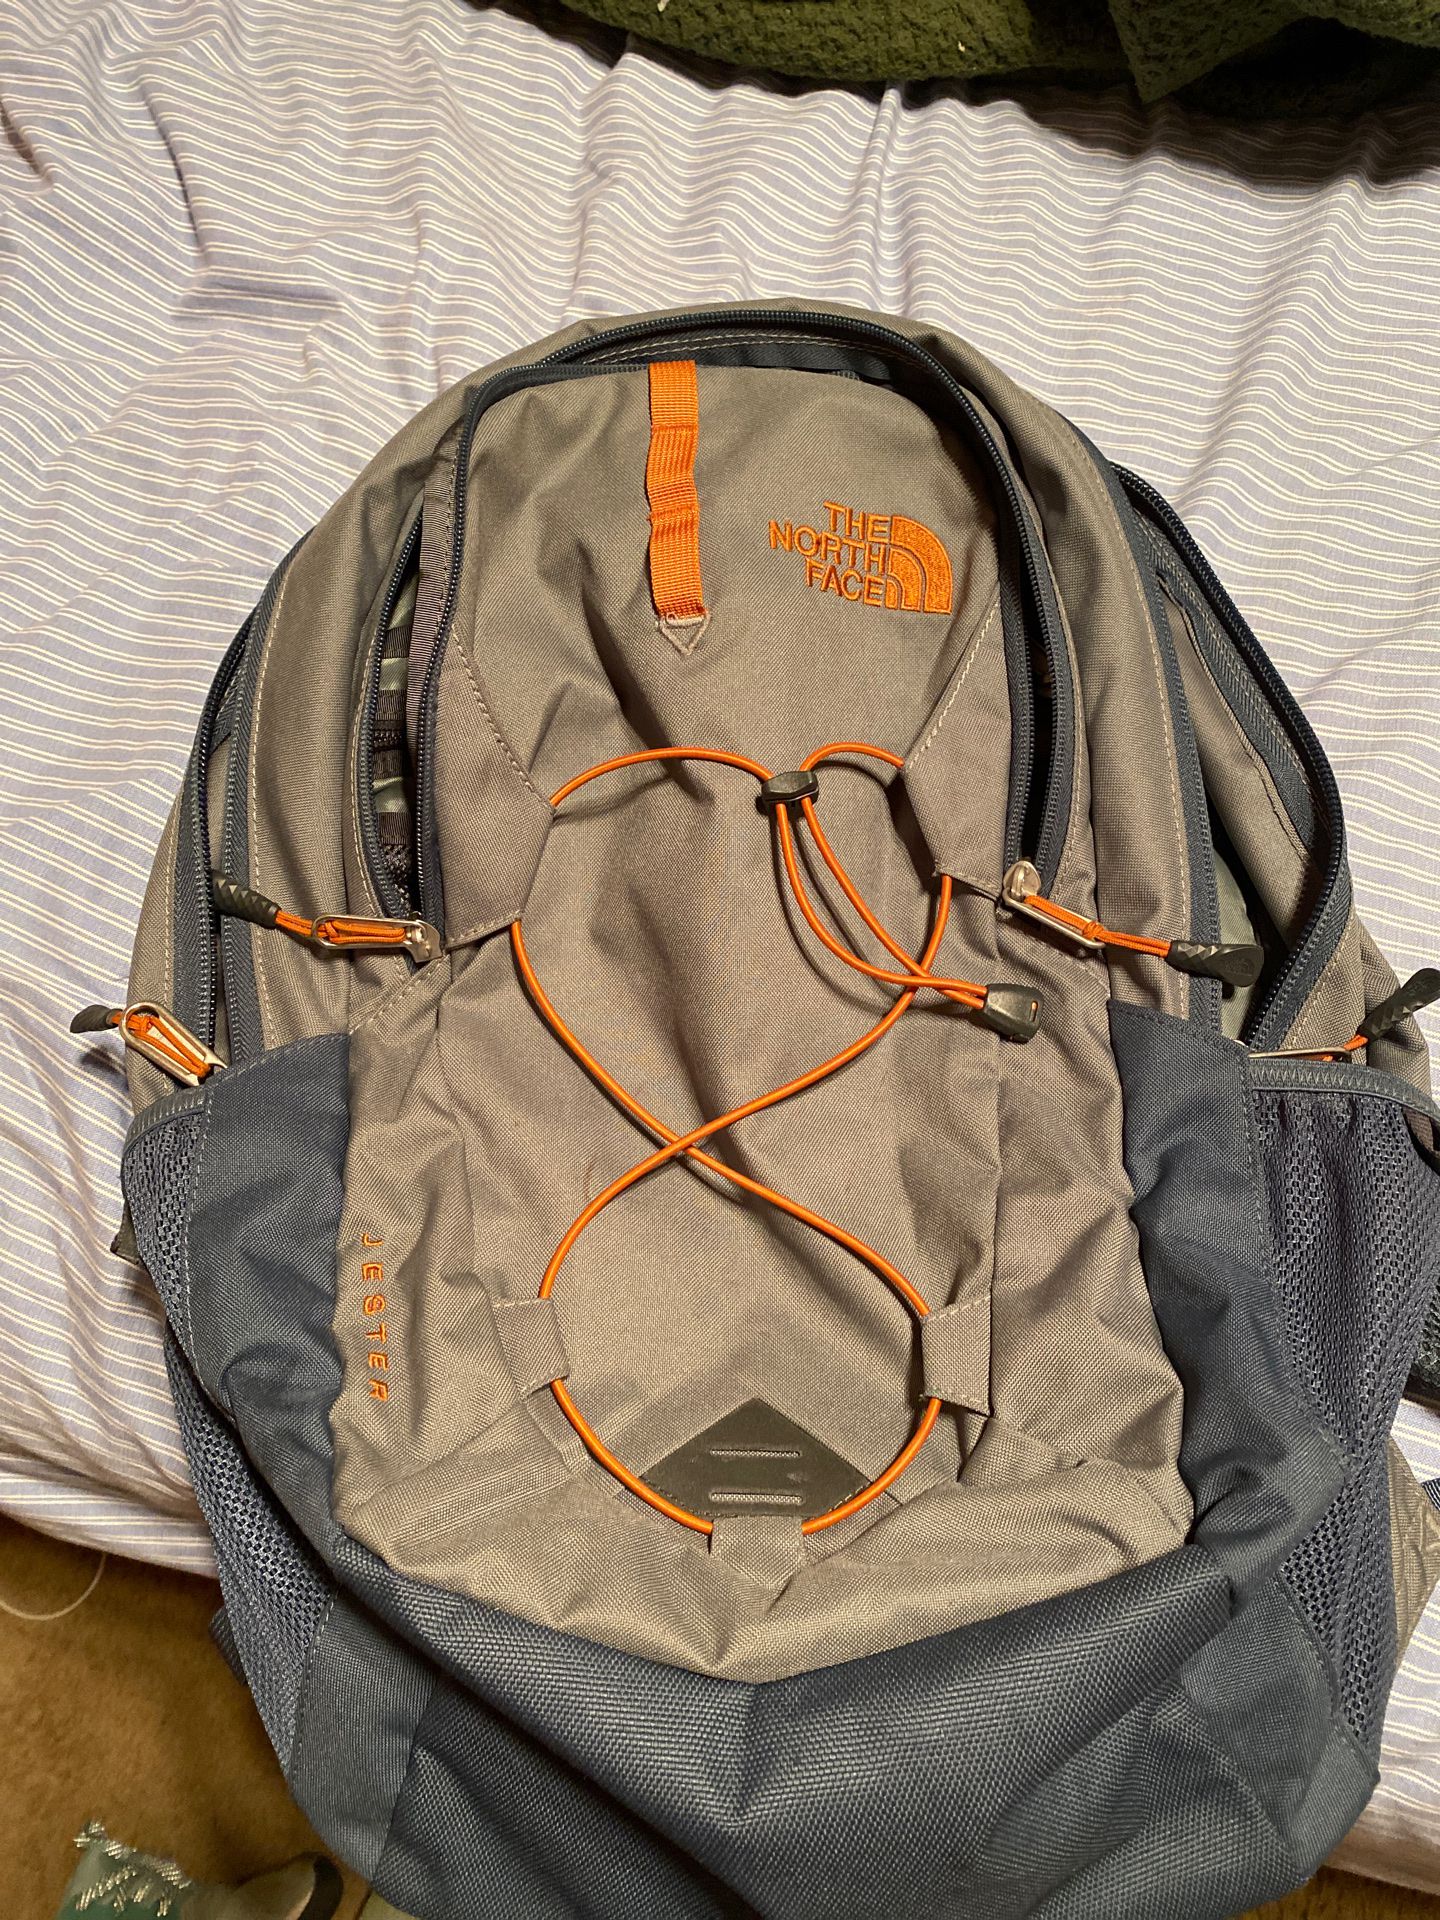 The North Face jester backpack